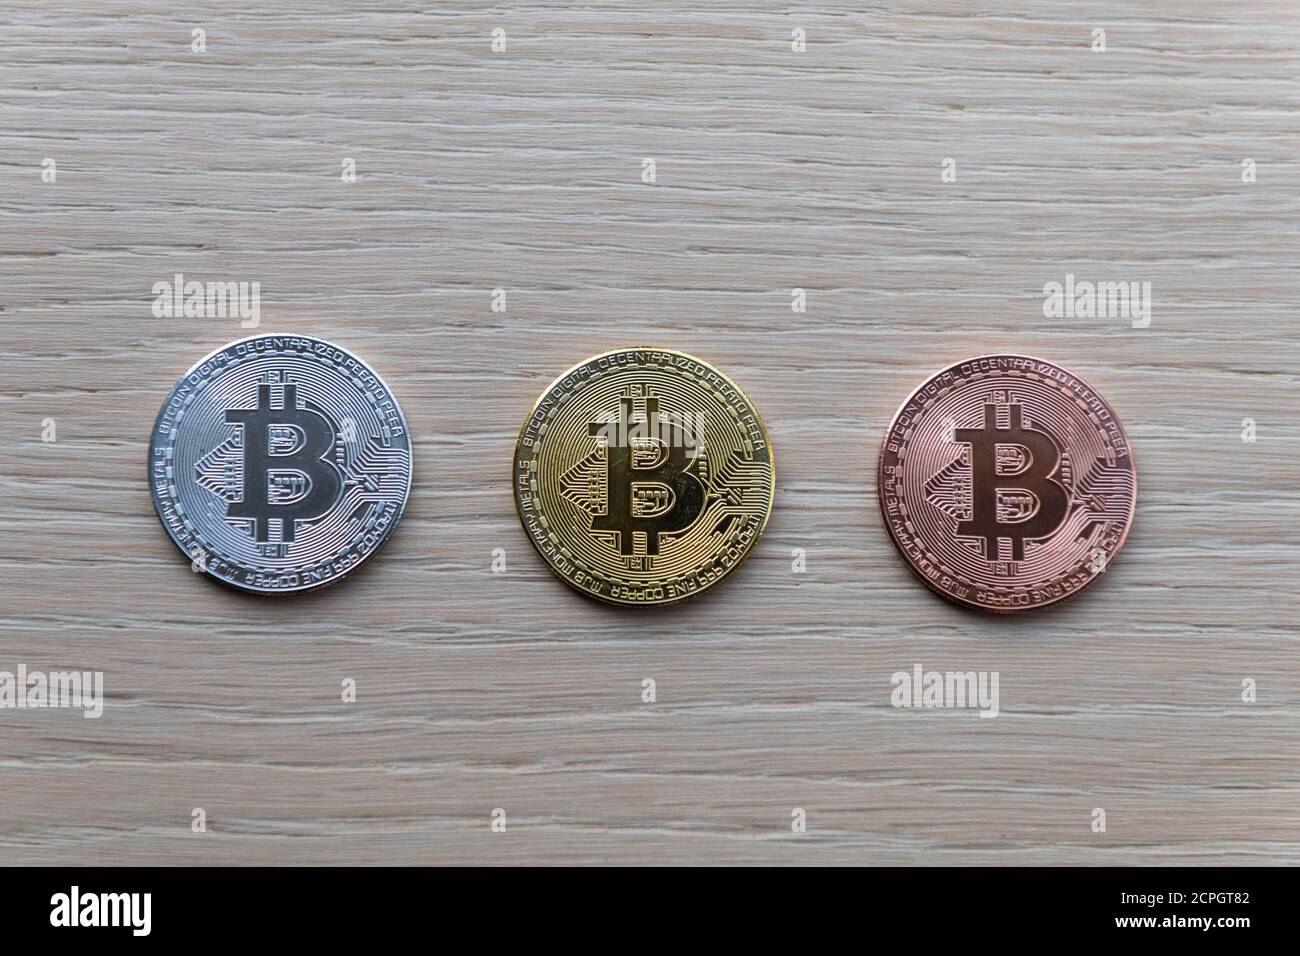 Symbol image digital currency, physical coin Bitcoin, silver, gold, bronze Stock Photo